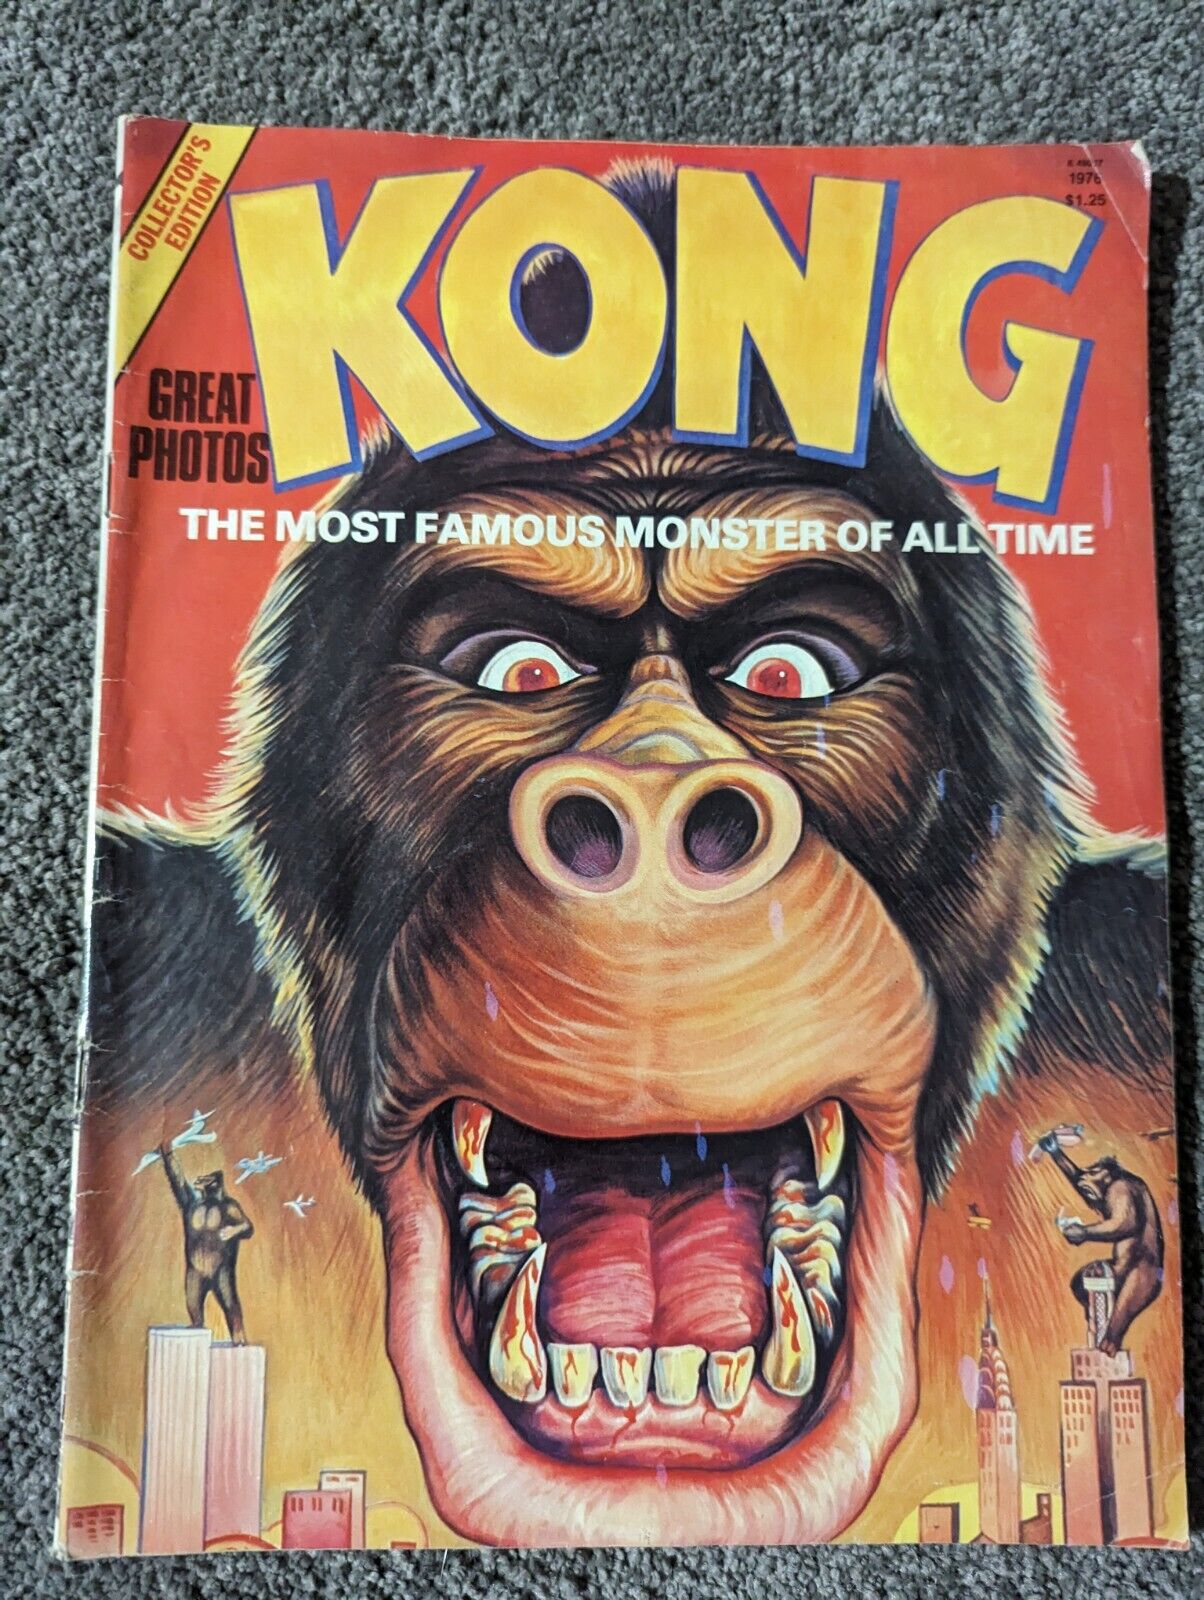 Kong #1 1976- The Most Famous Monster Of All Time-Skull Island-Godzilla-FN